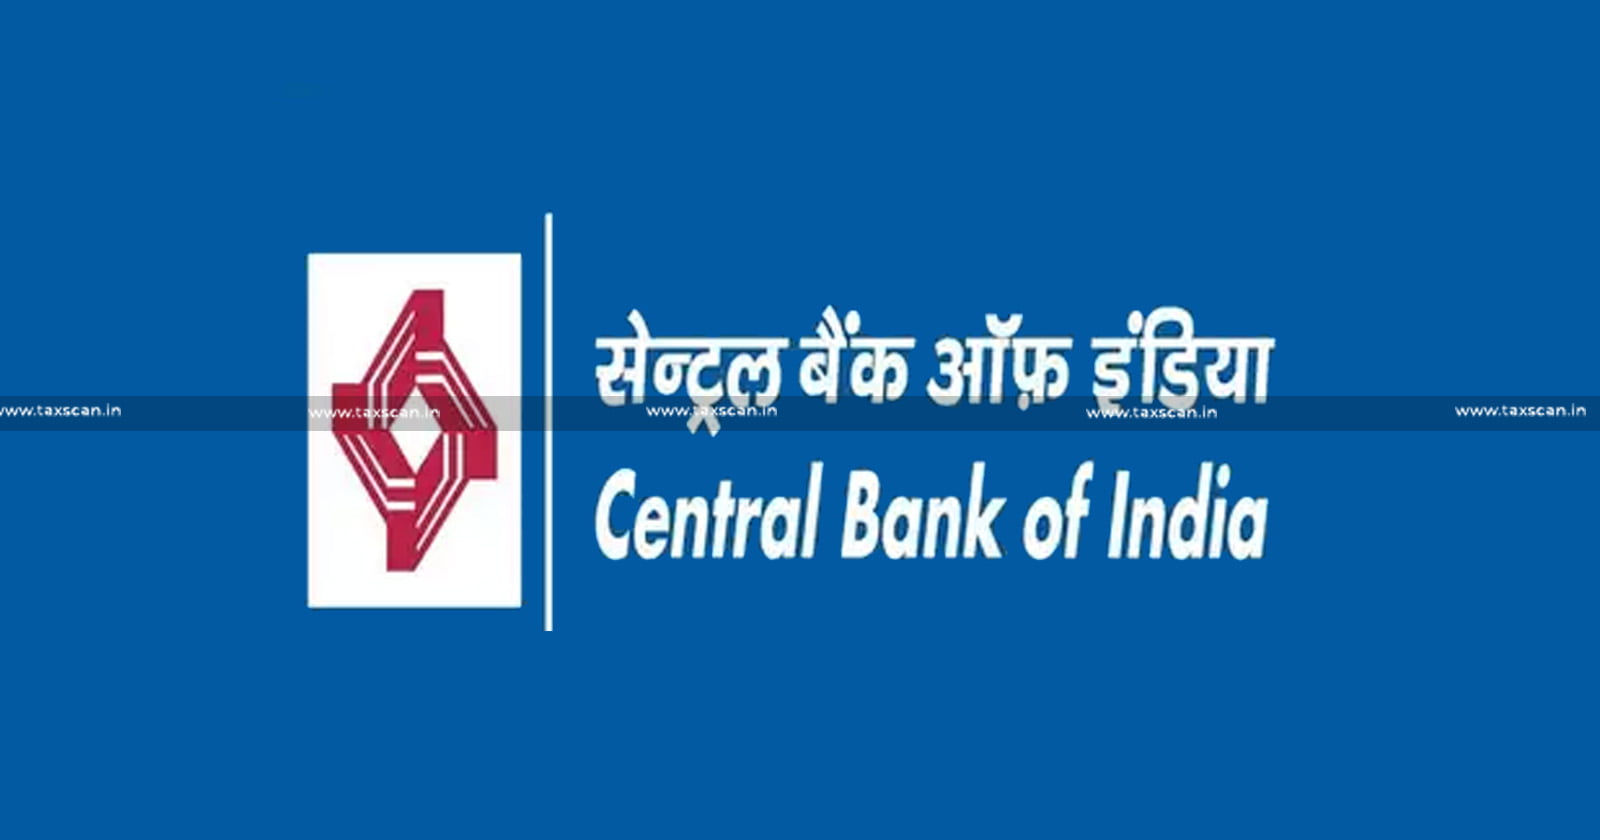 Central Bank of India - Concurrent Auditors - Bank - Central Bank - Counter Sign - Stock Statements of Borrowers - Borrowers - Stock - Audit report - Audit - taxscan